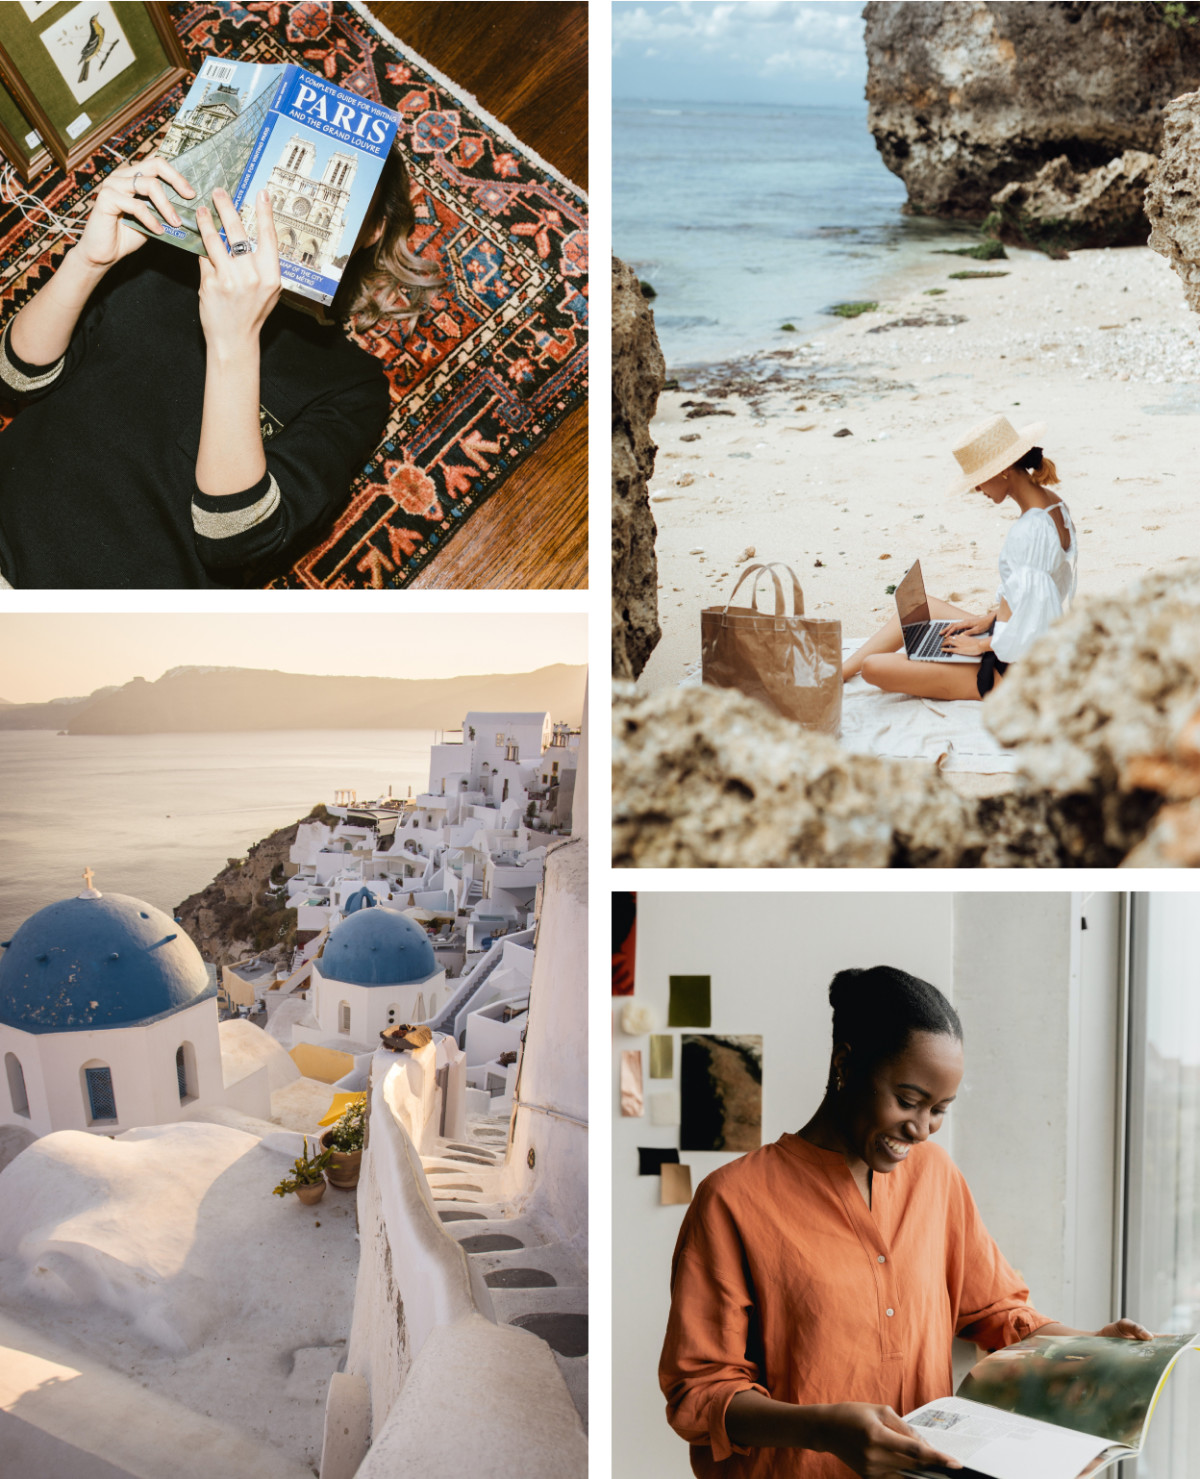 grid of images with travel theme